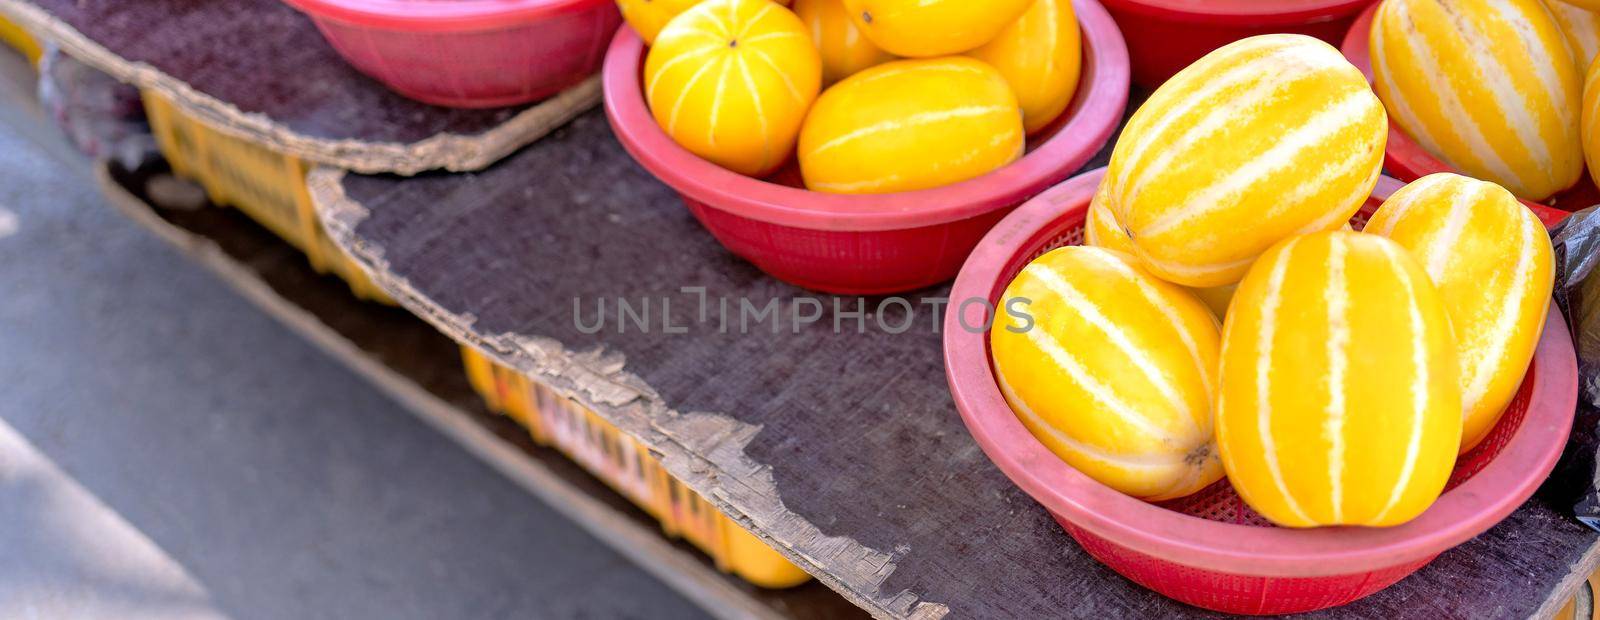 Delicious korean stripe yellow melon fruit food in red plastic basket at tradition market afternoon, Seoul, South Korea, harvest concept, close up.